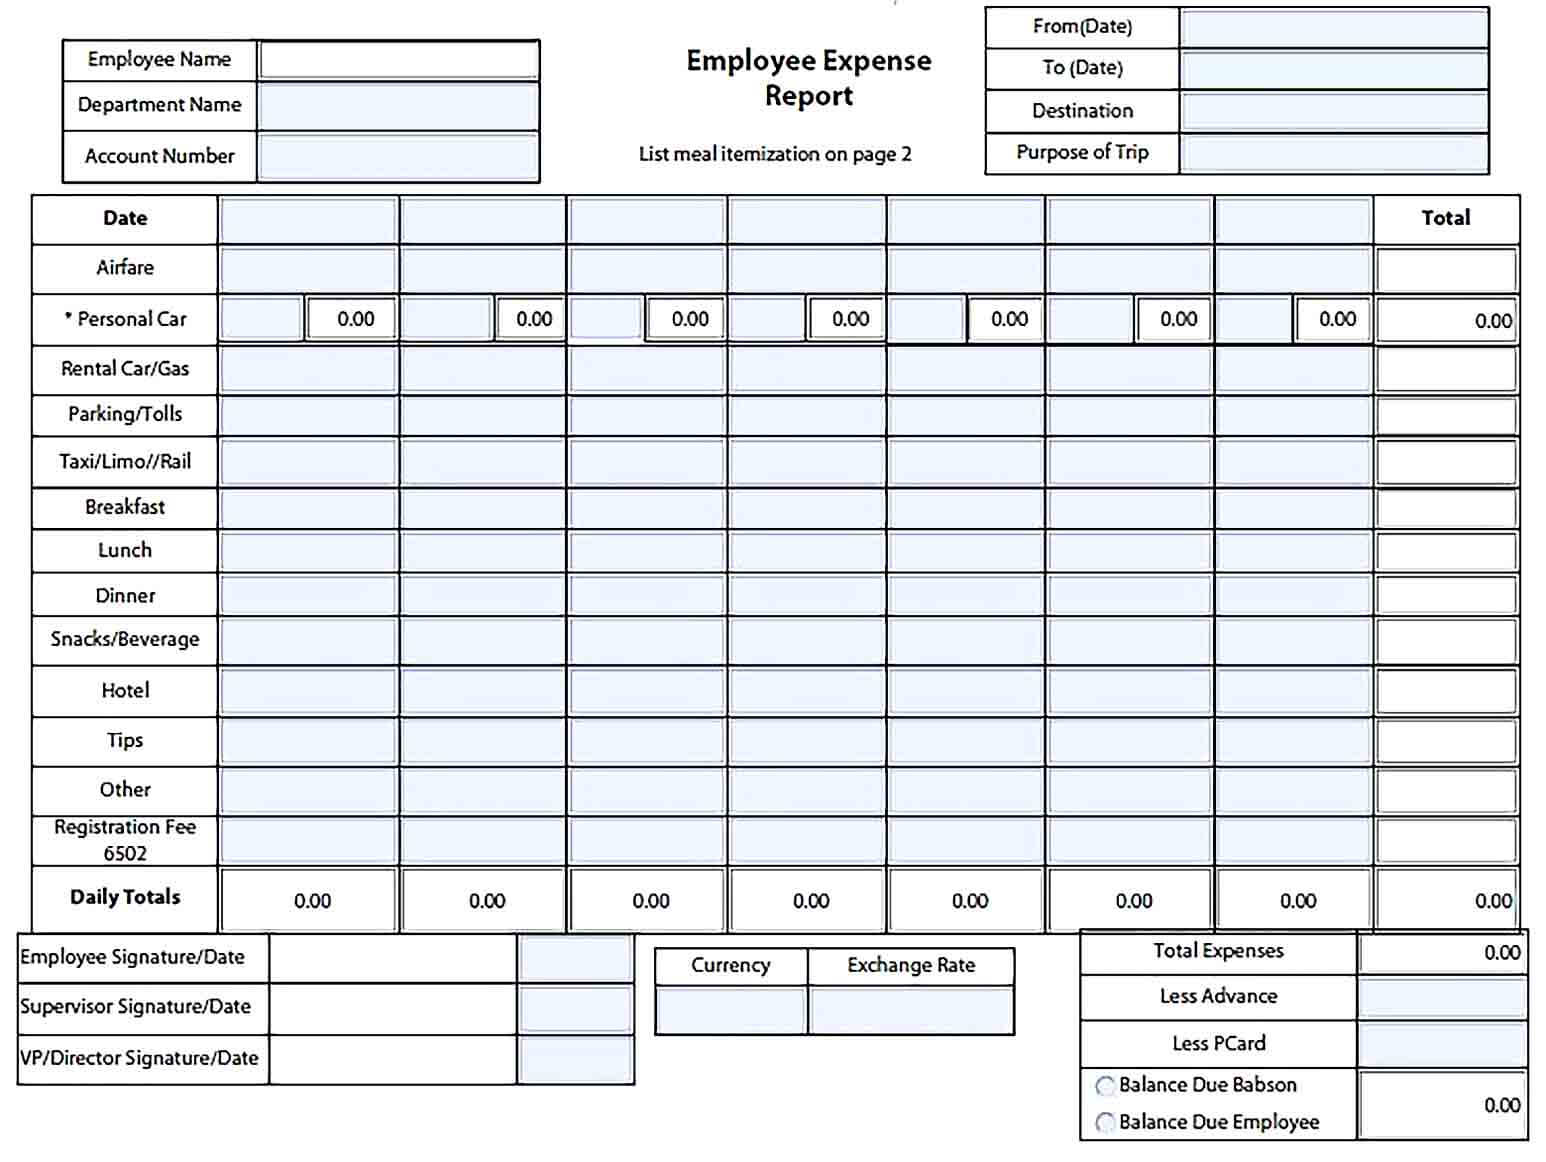 Sample Employee Expense Report Template